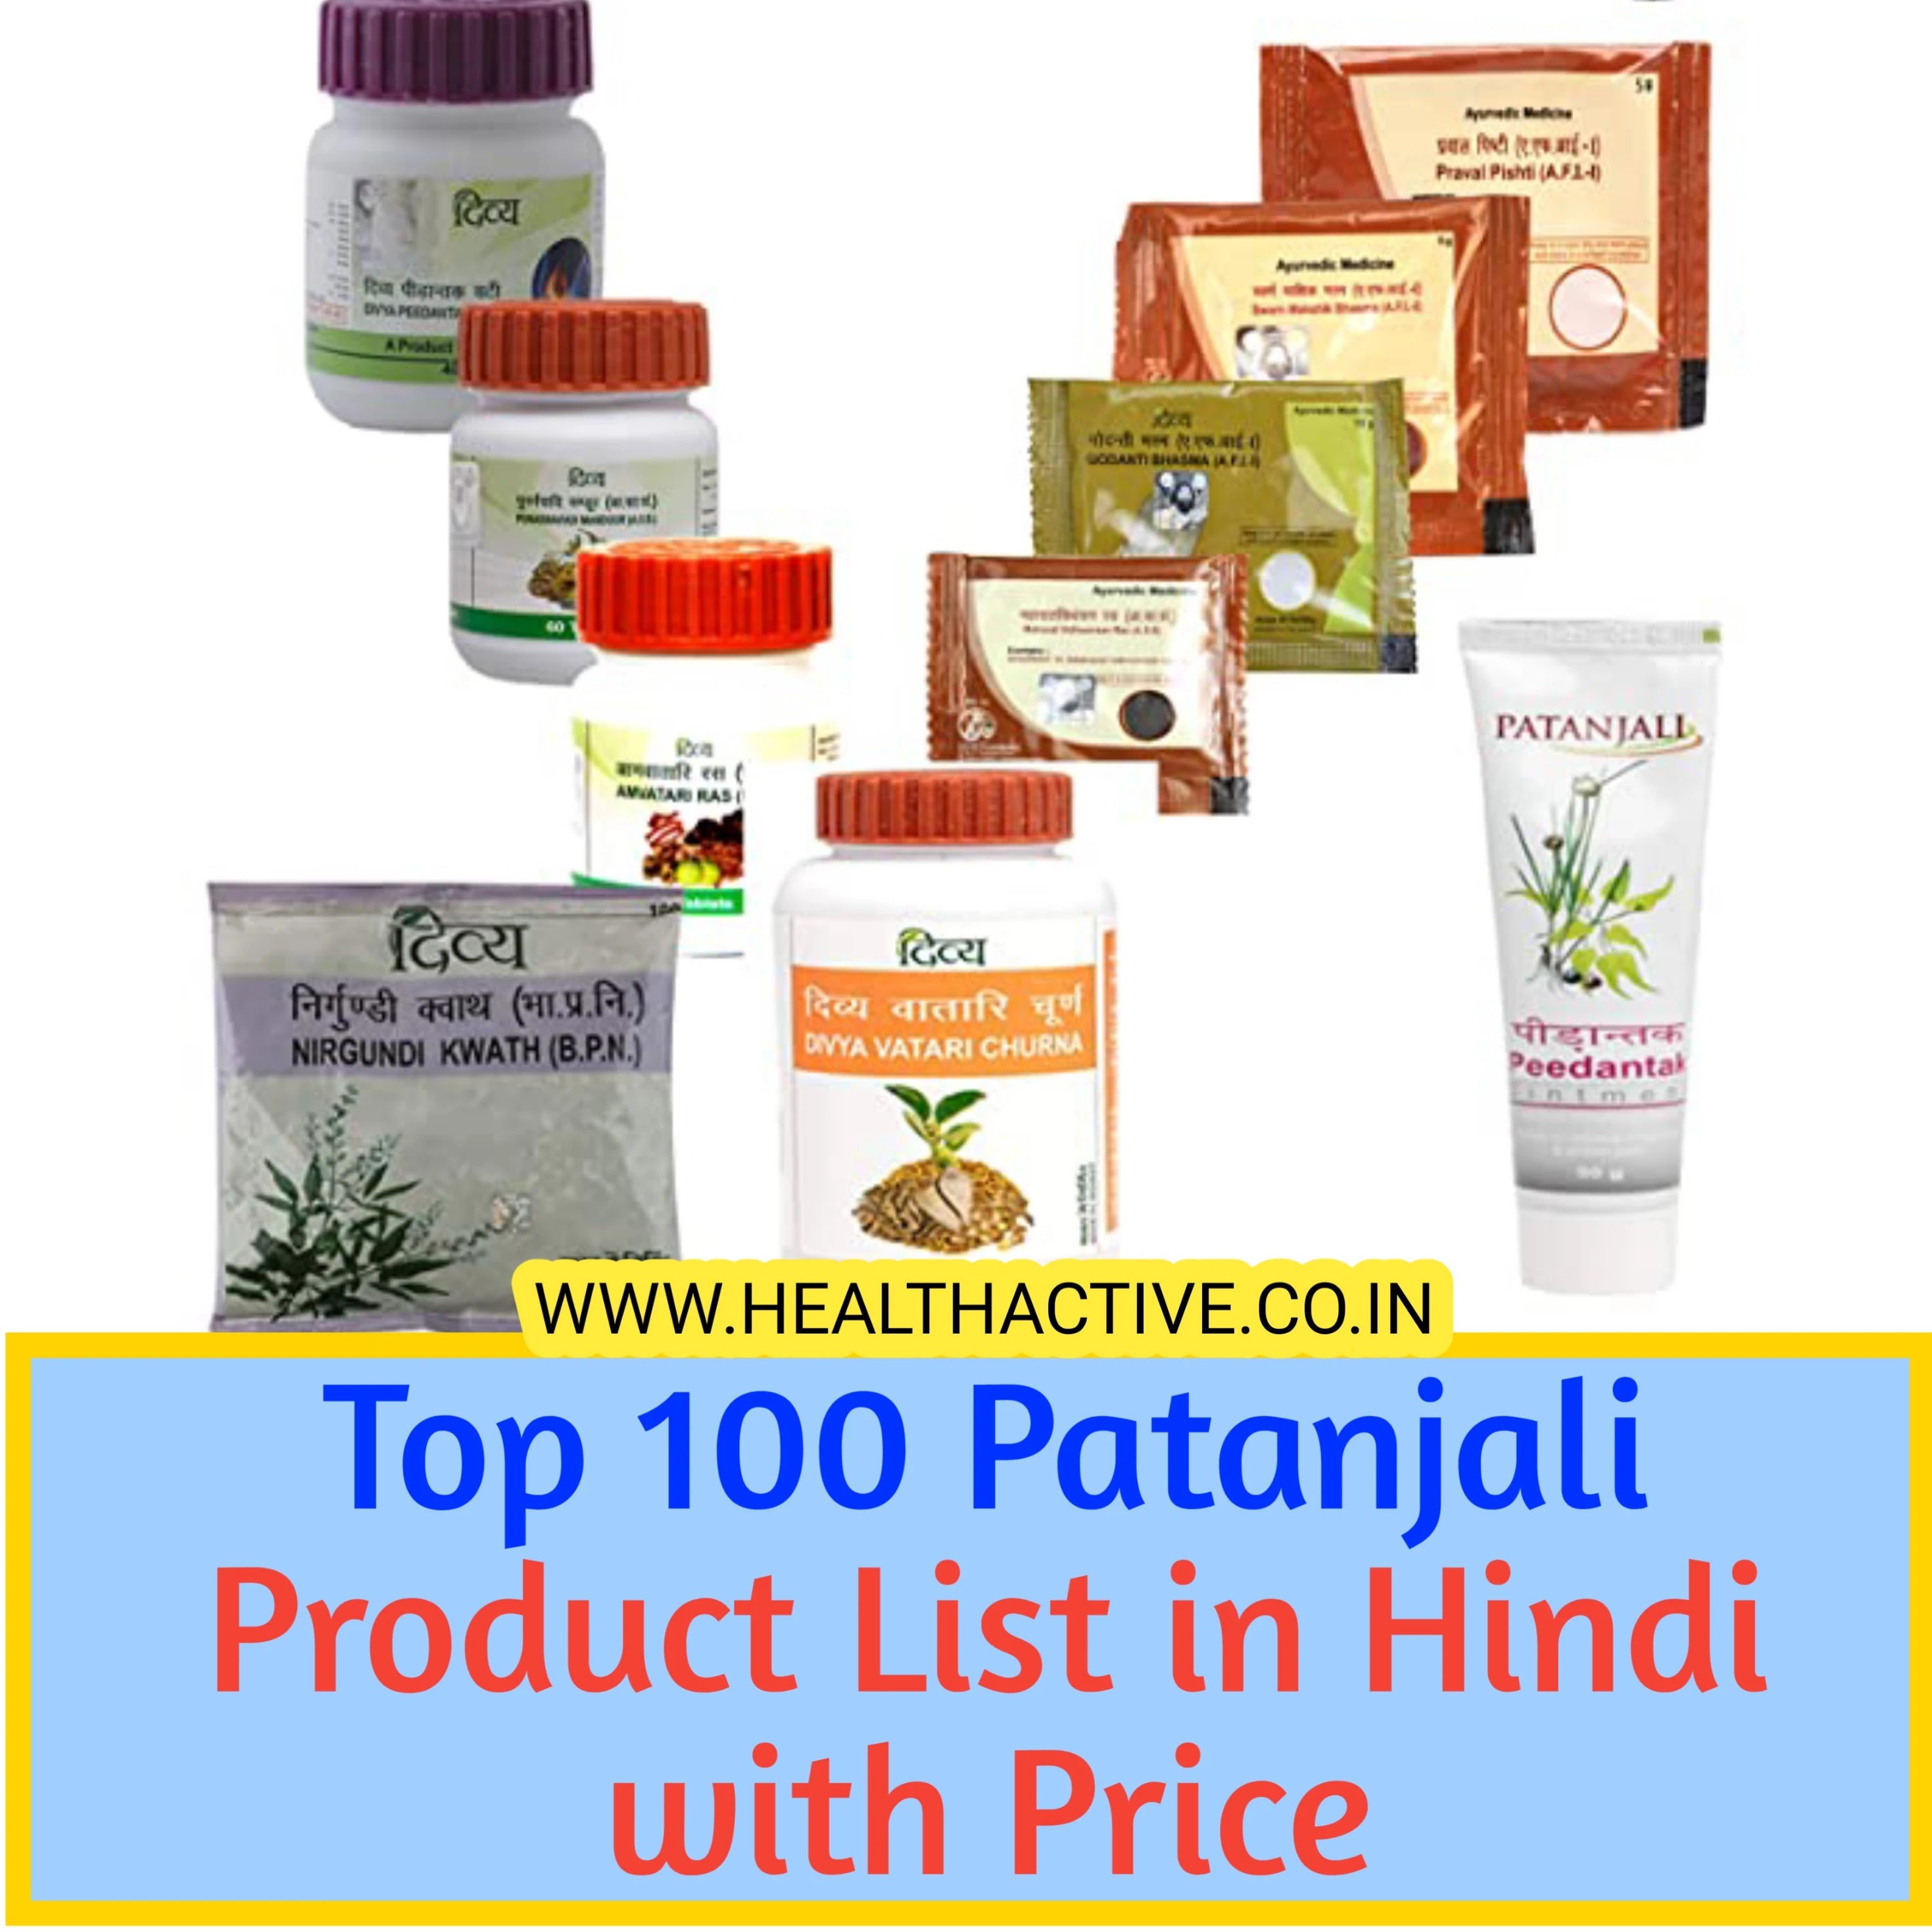 Patanjali Products List in Hindi with Price